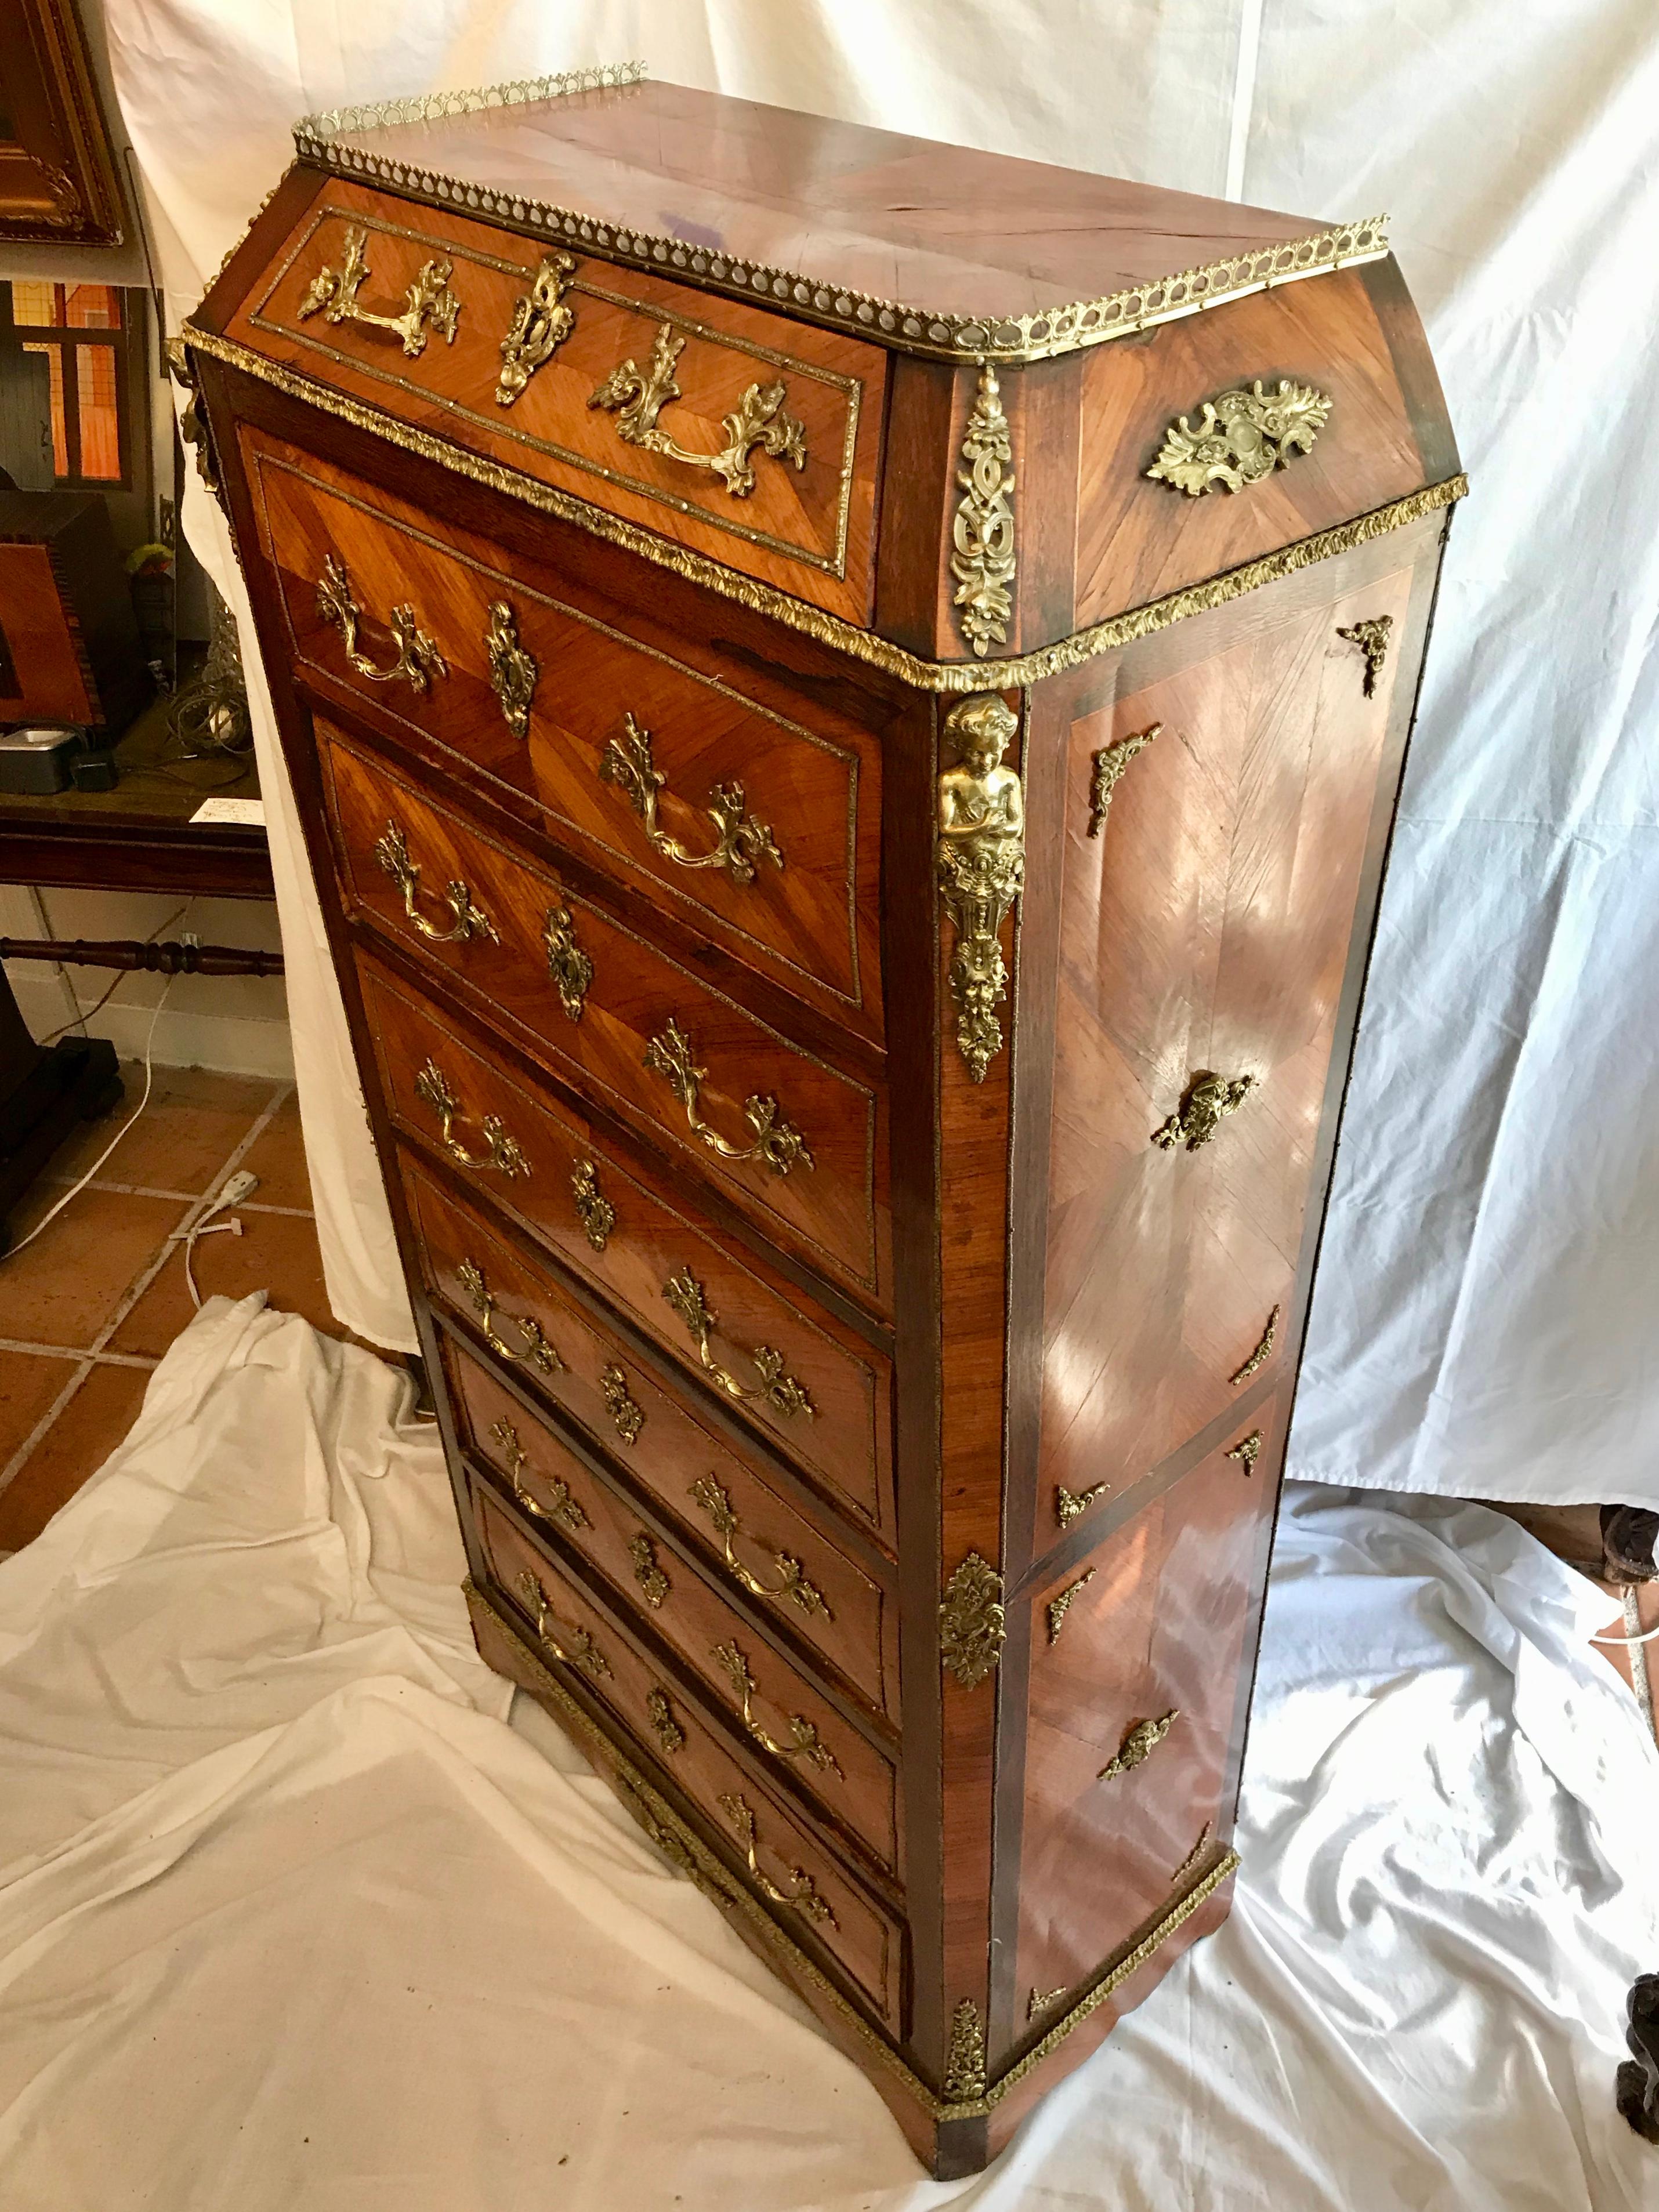 Superb quality antique Louis XV style ormolu- mounted kingwood chest of drawers, (Seminar), 19th century. pyramid form top with reticulated gallery, case fitted with 7 drawers. Original patina very good quality ormolu. The drawers are all solid oak